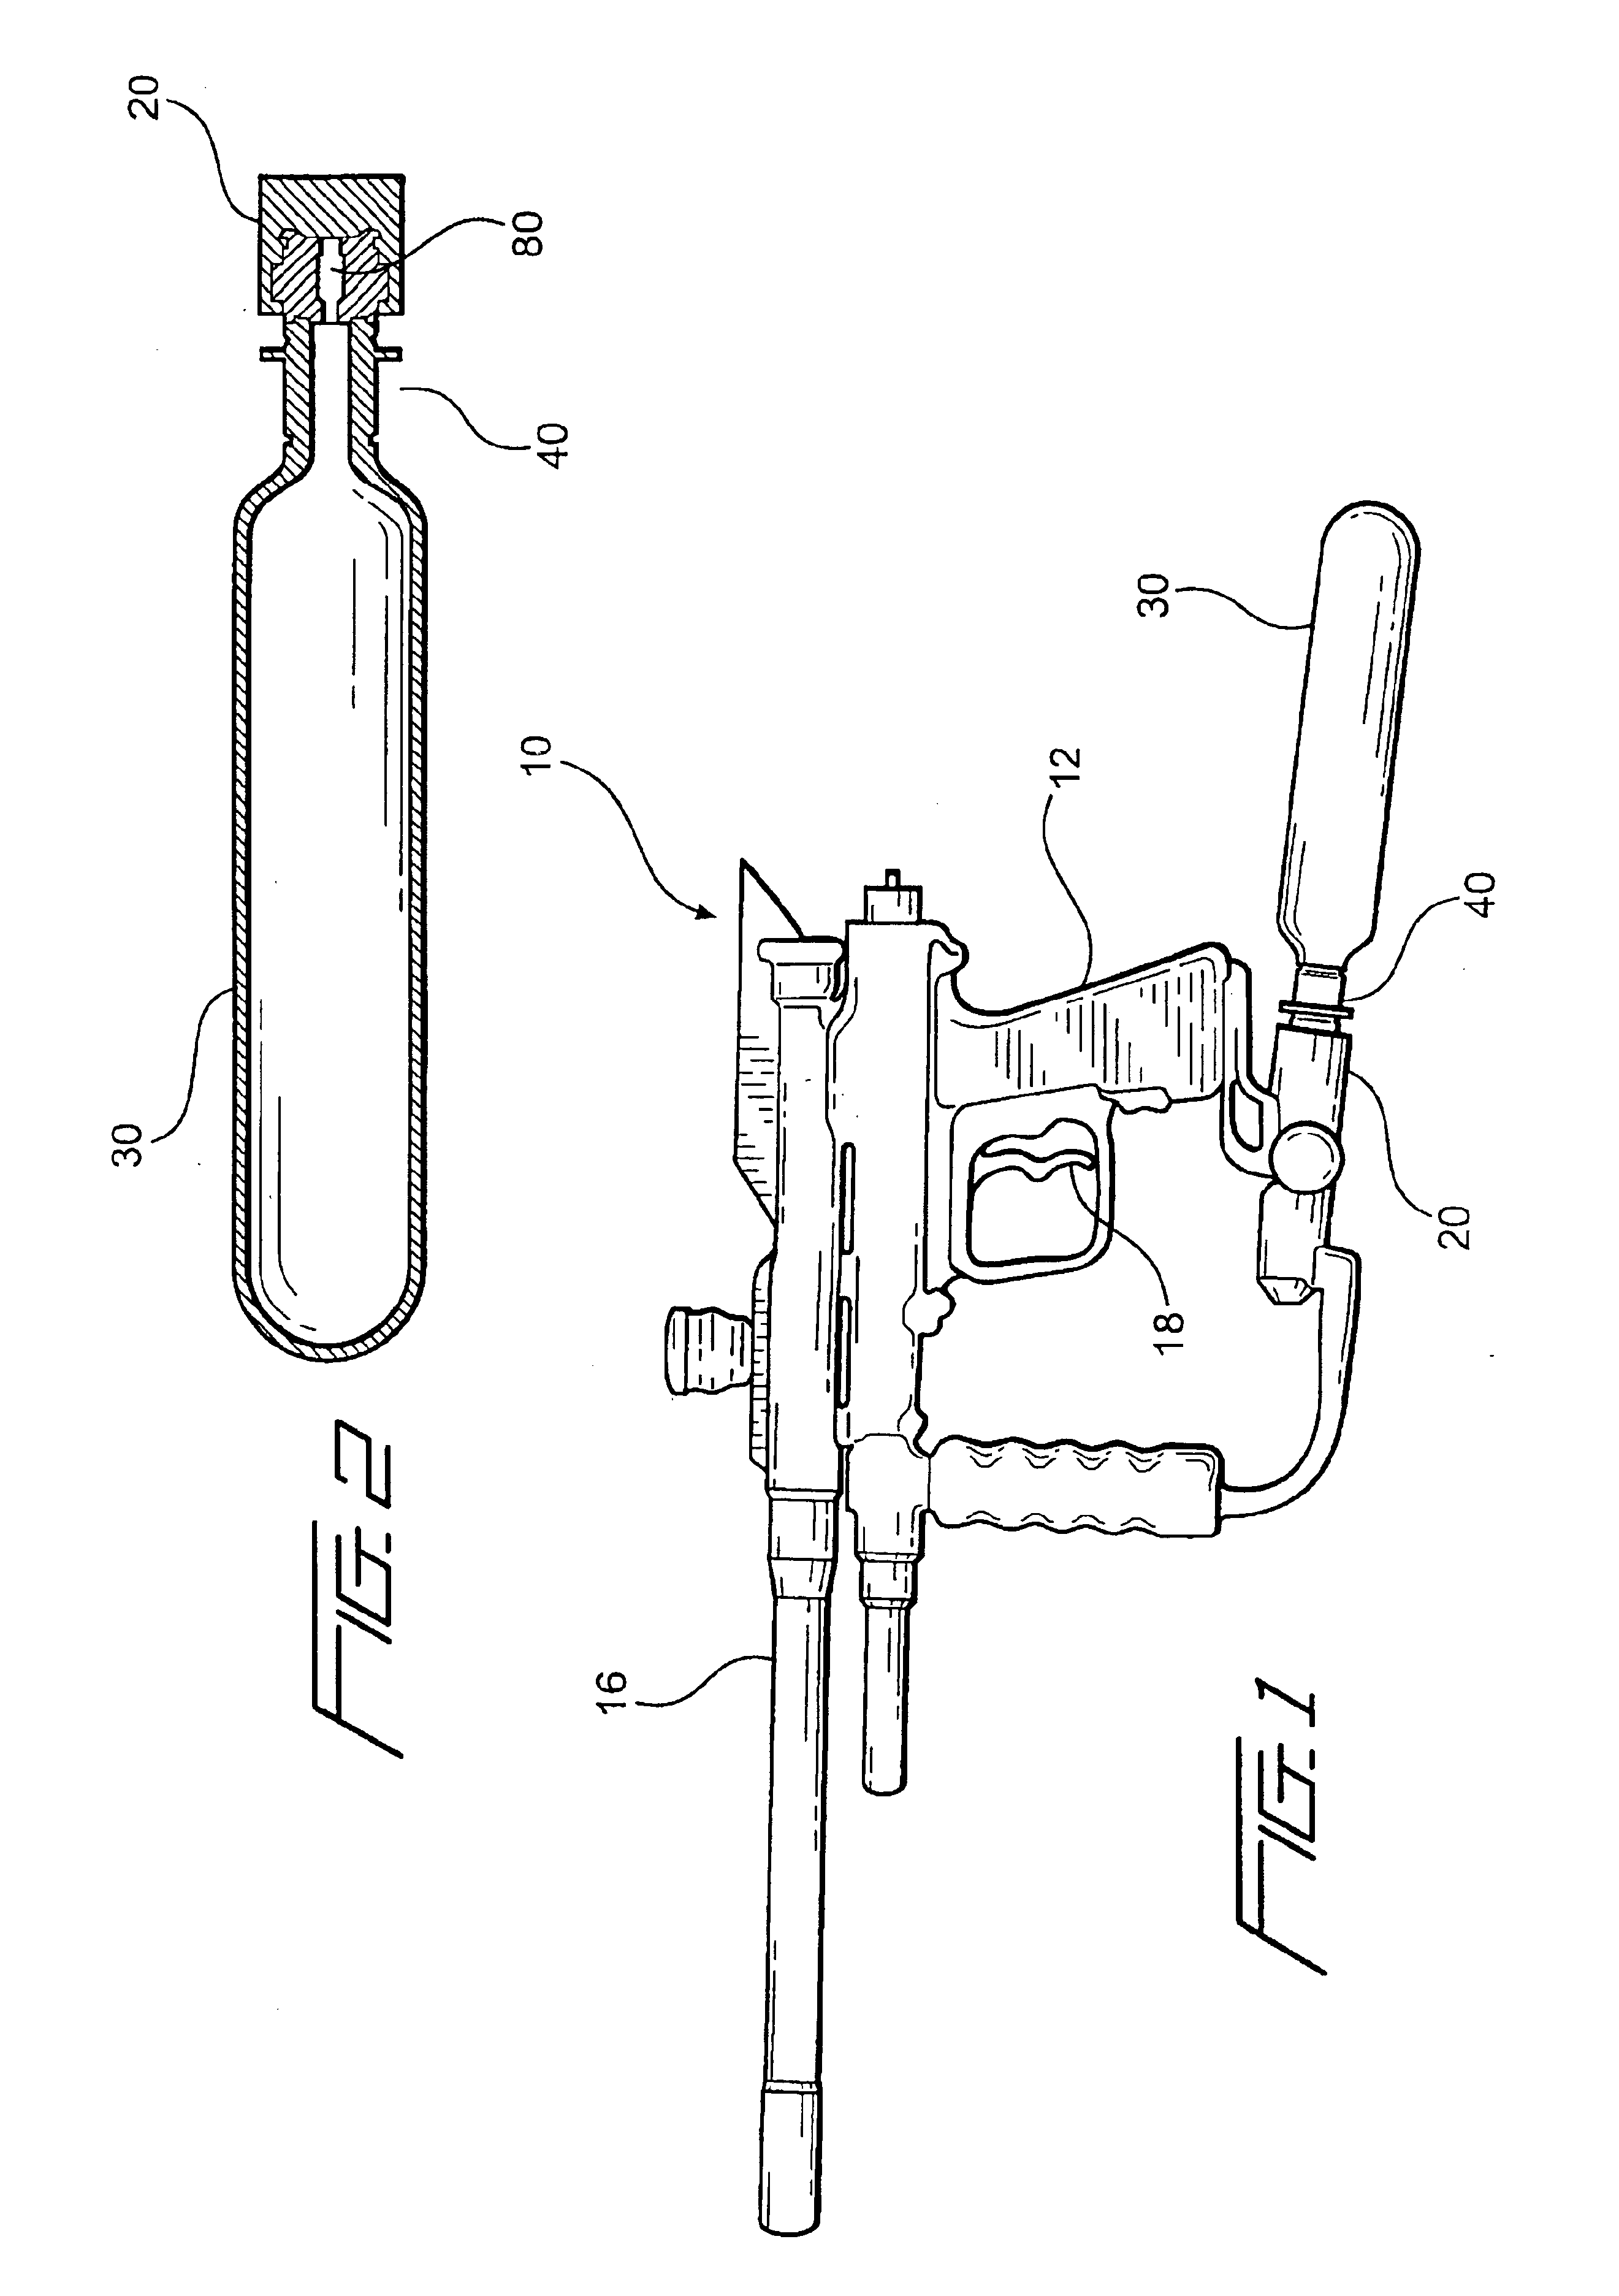 Adapter assembly with floating pin for operably connecting pressurized bottle to a paintball marker